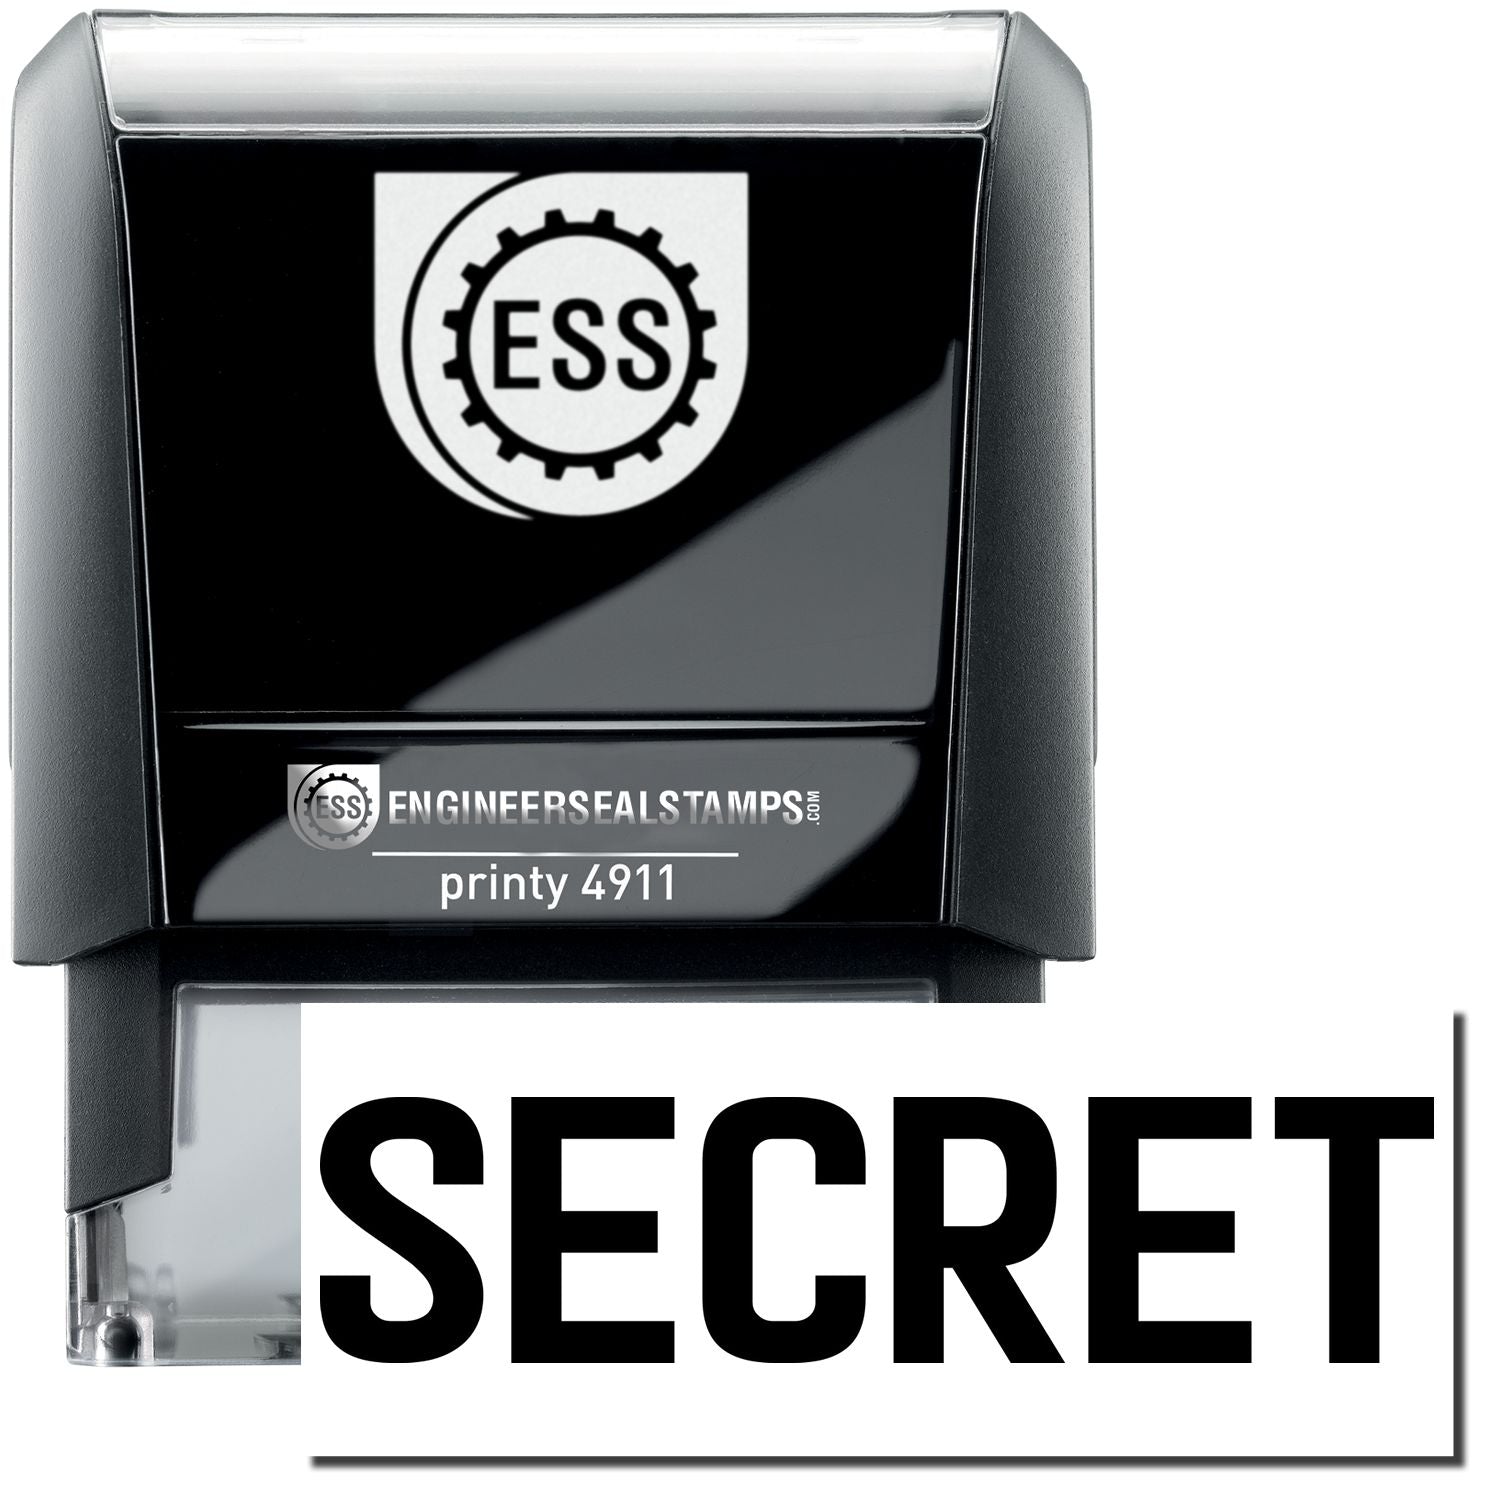 A self-inking stamp with a stamped image showing how the text "SECRET" is displayed after stamping.